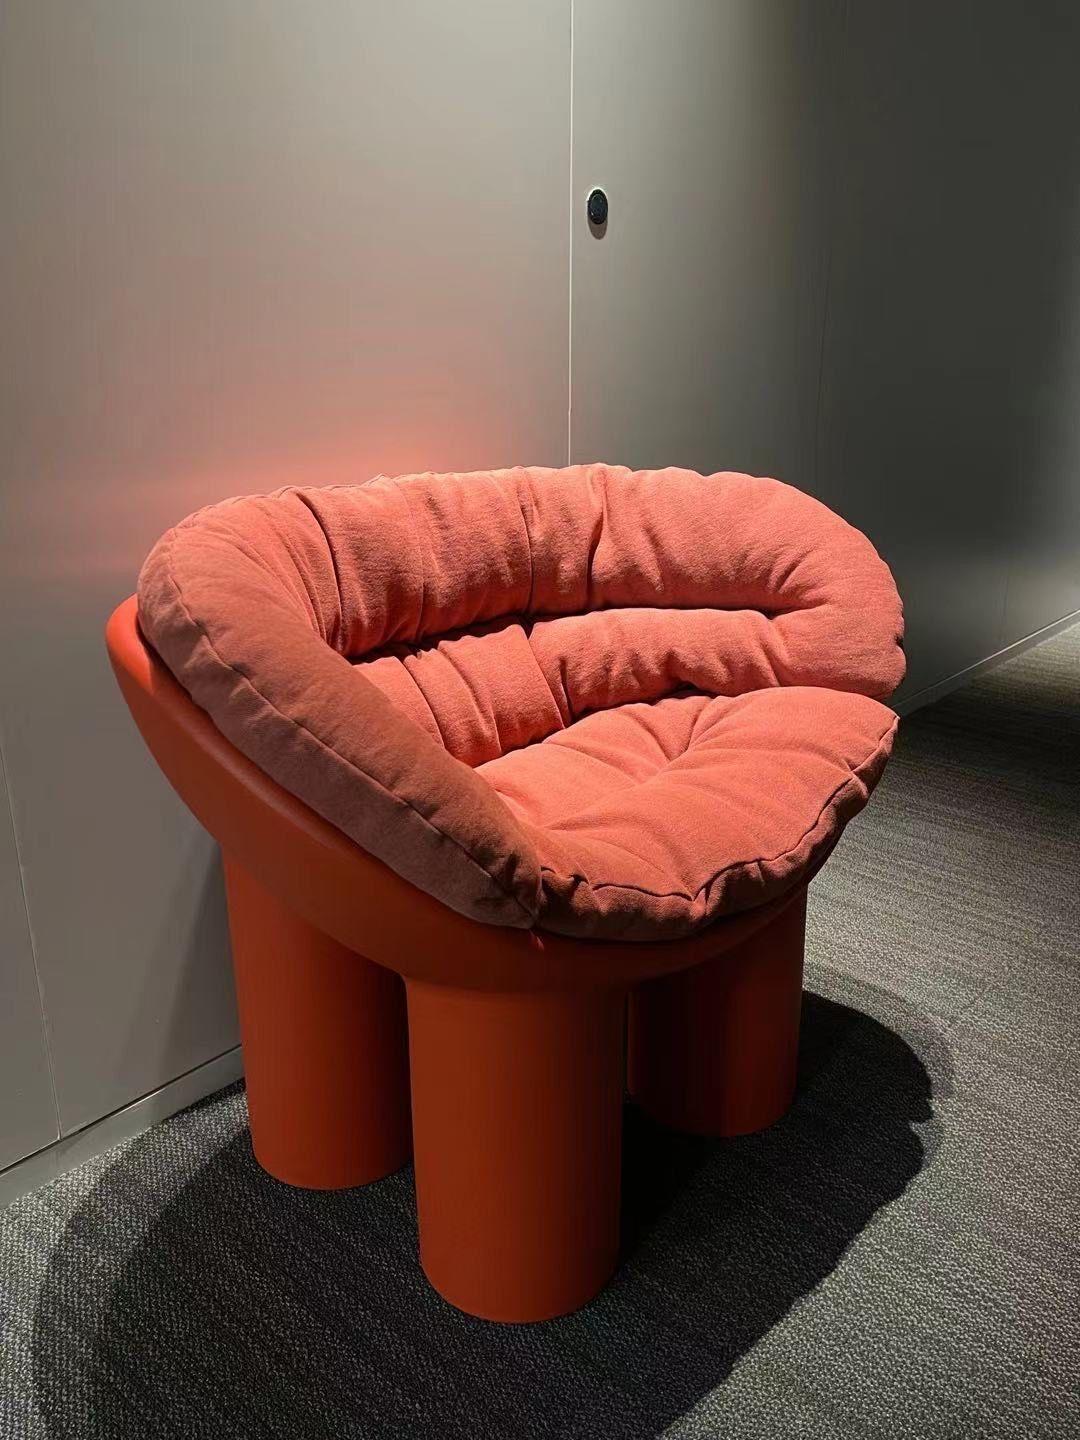 In Stock Roly Poly Armchair Red Brick By Driade, Faye Toogood For Sale 1